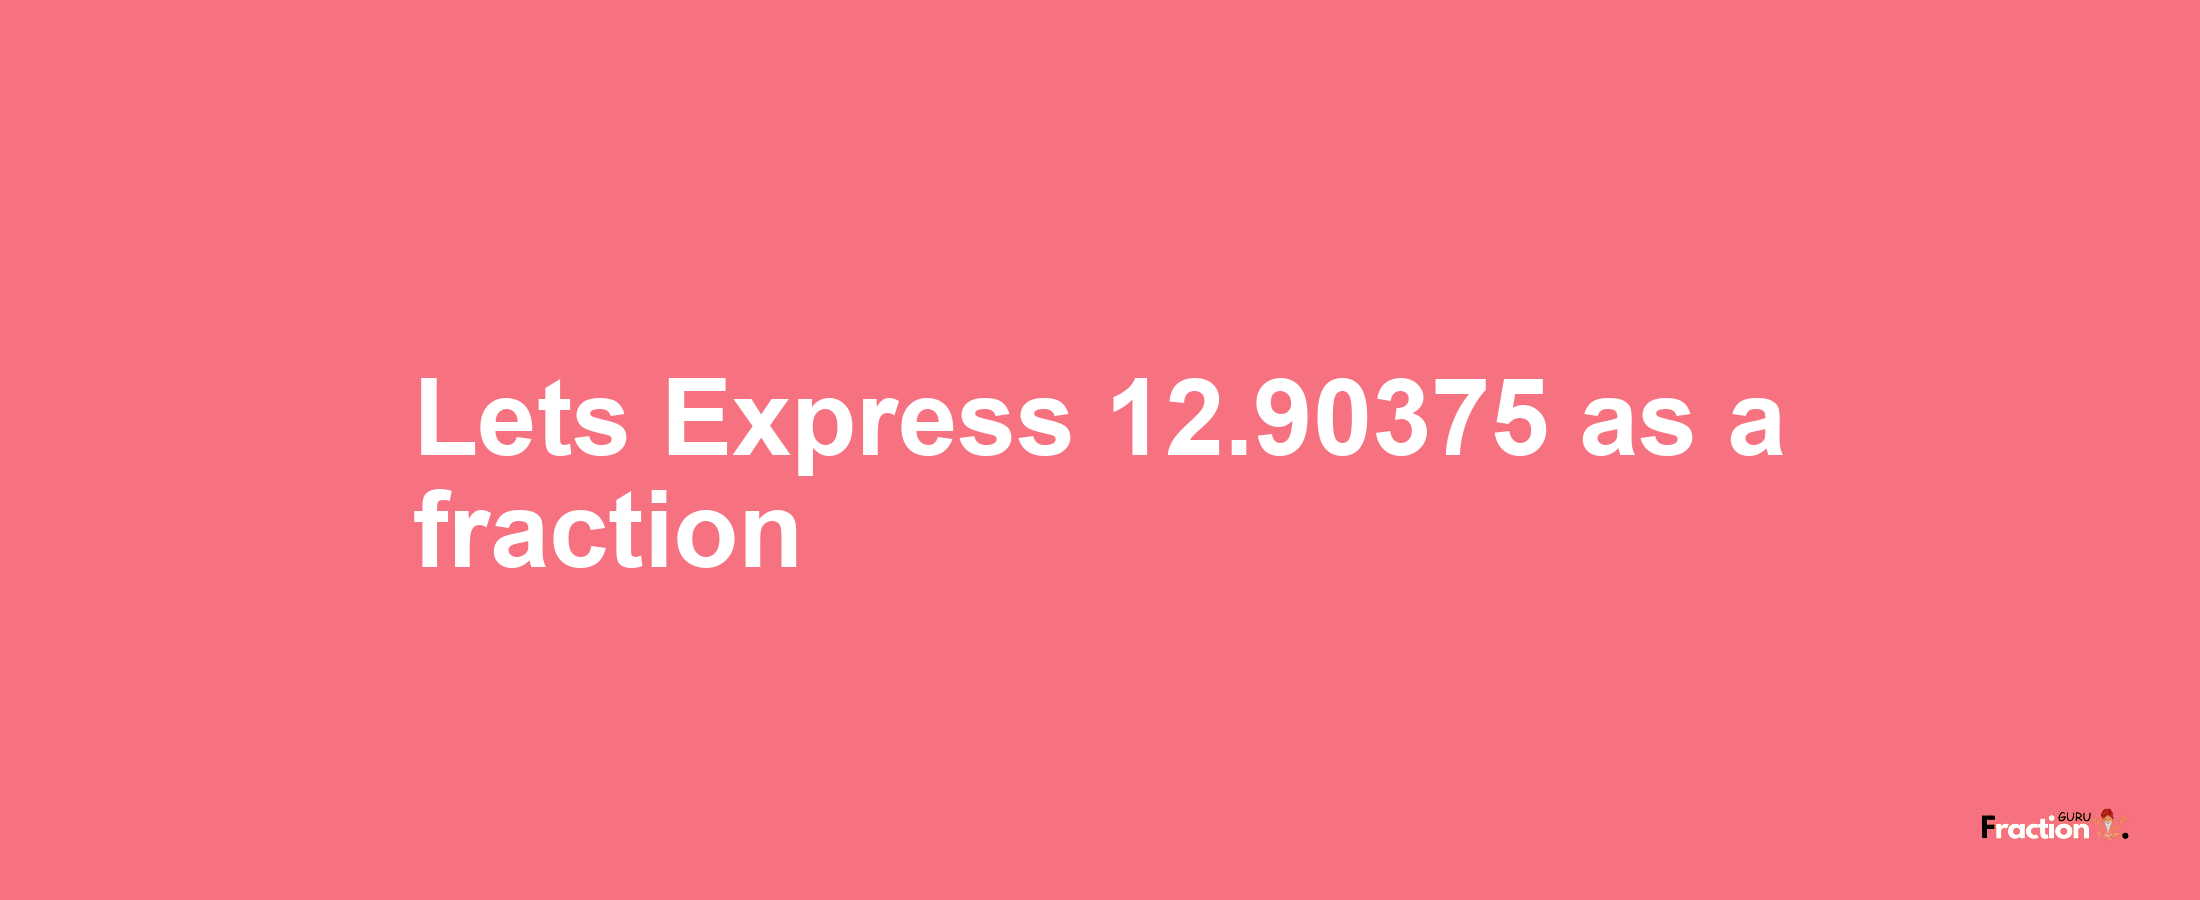 Lets Express 12.90375 as afraction